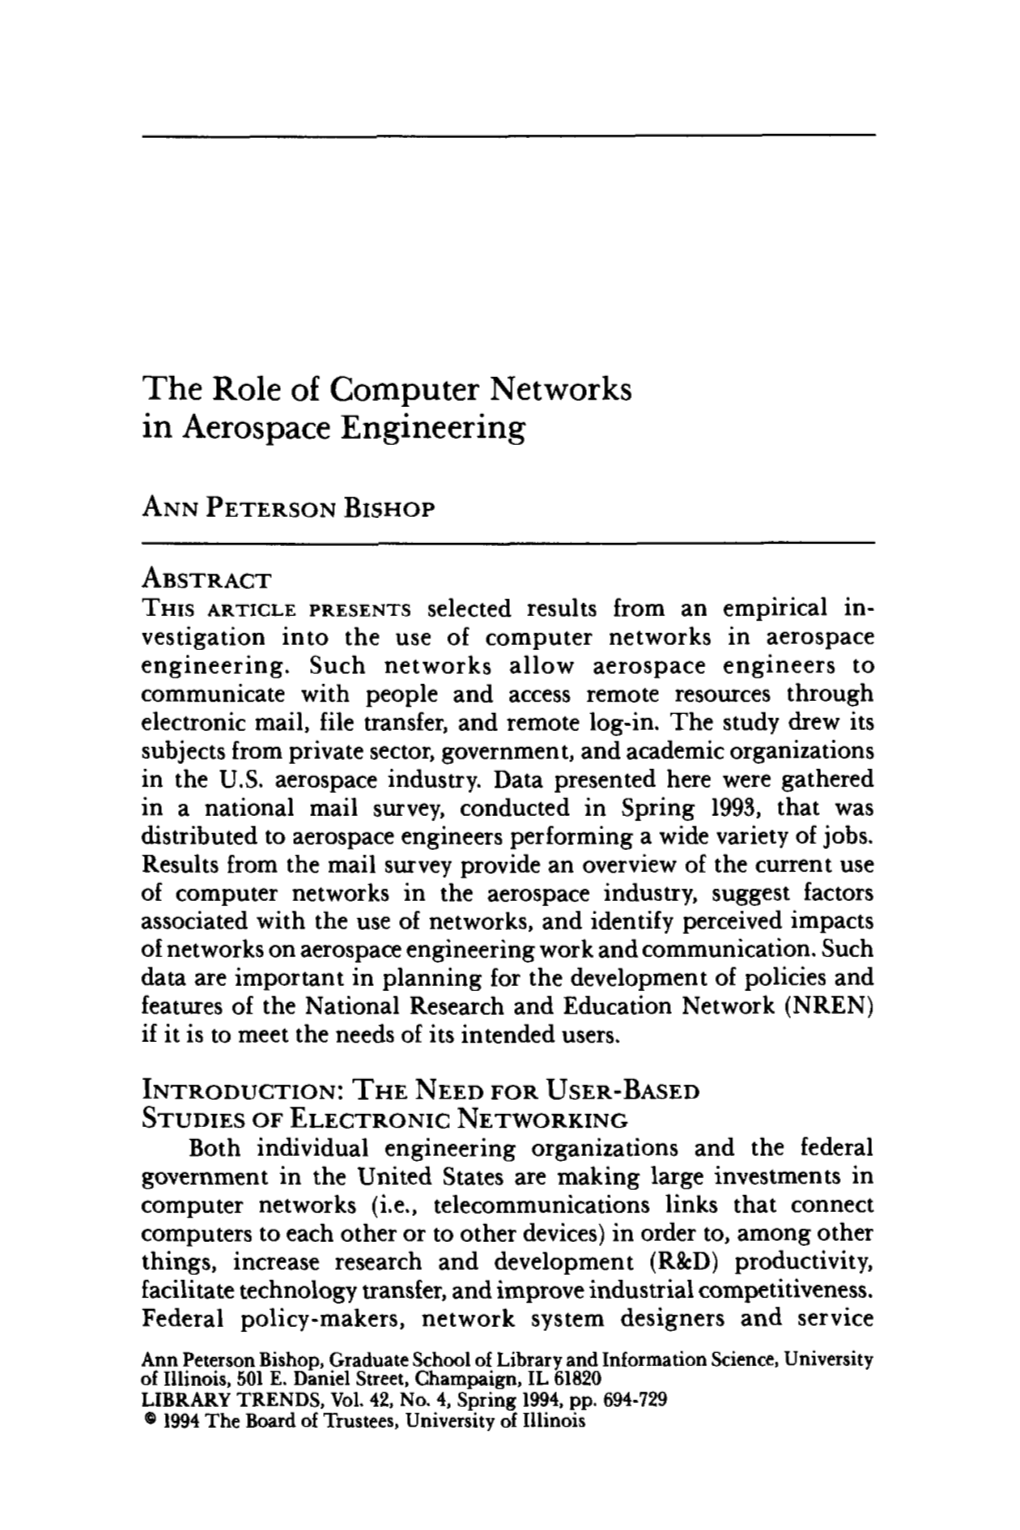 The Role of Computer Networks in Aerospace Engineering